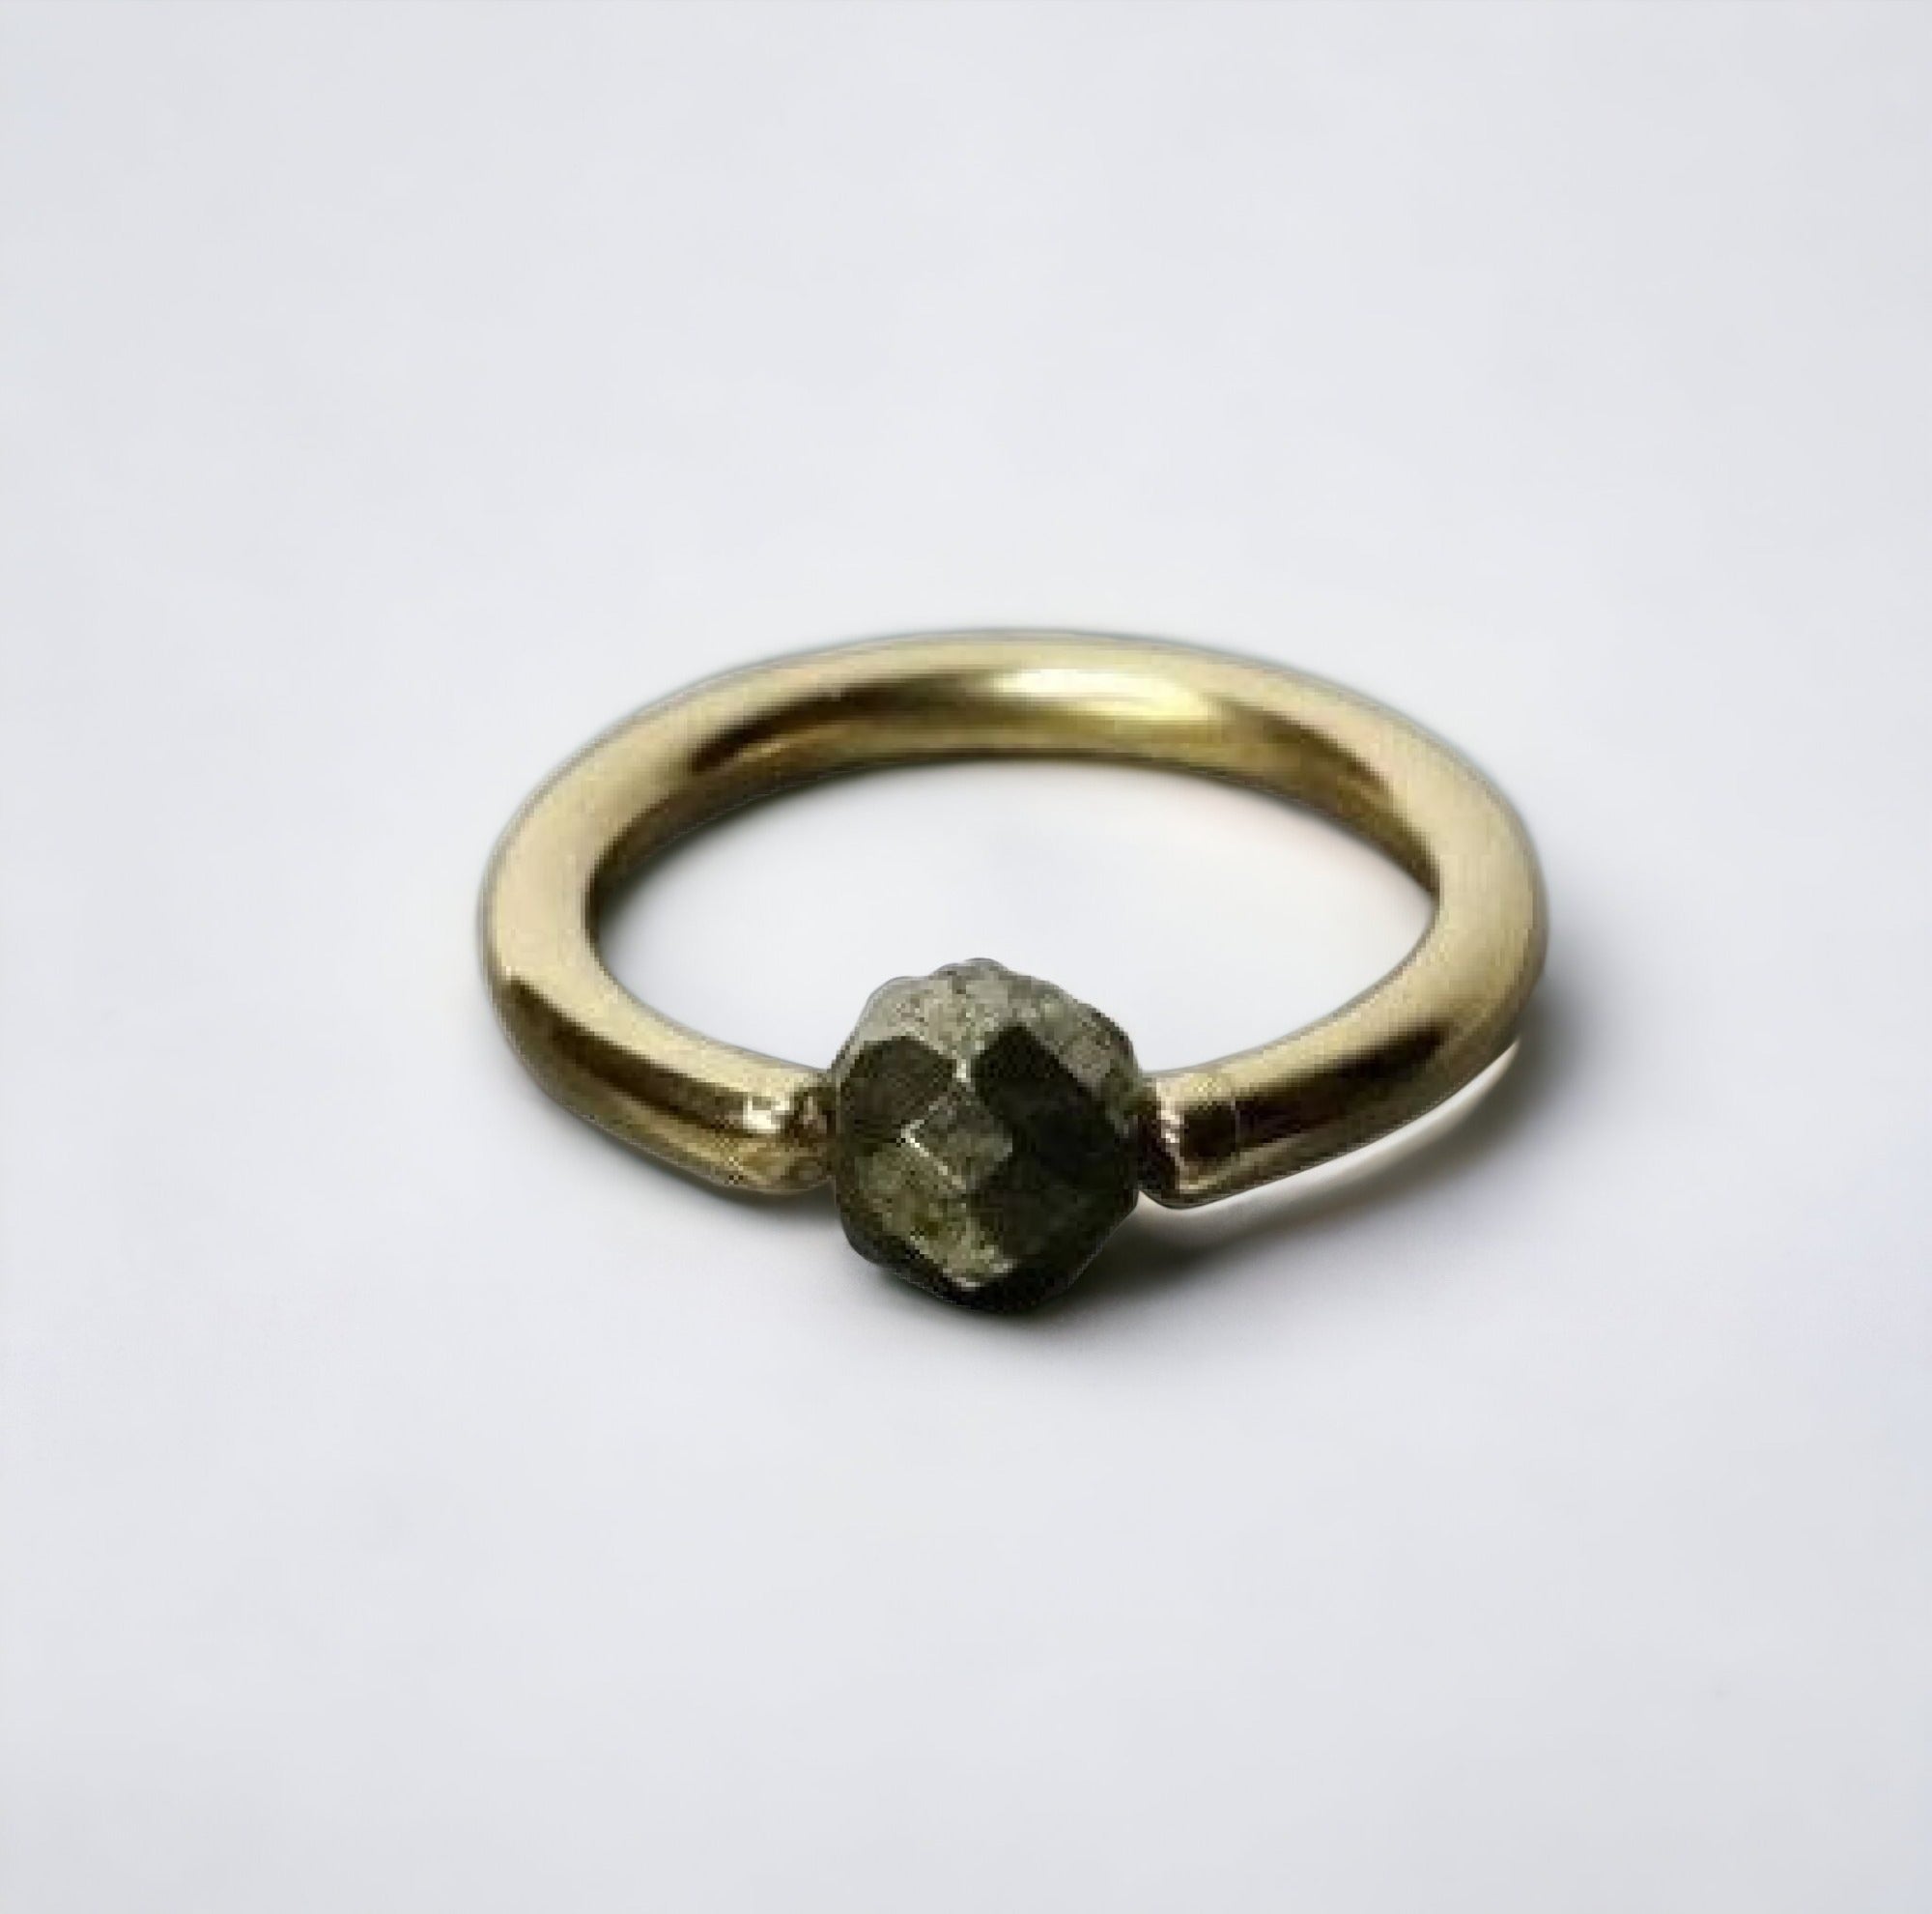 Pyrite Faceted Captive Bead Ring - 14 ga Hoop - 14k Gold (Y, W, or R), Sterling Silver, or Platinum